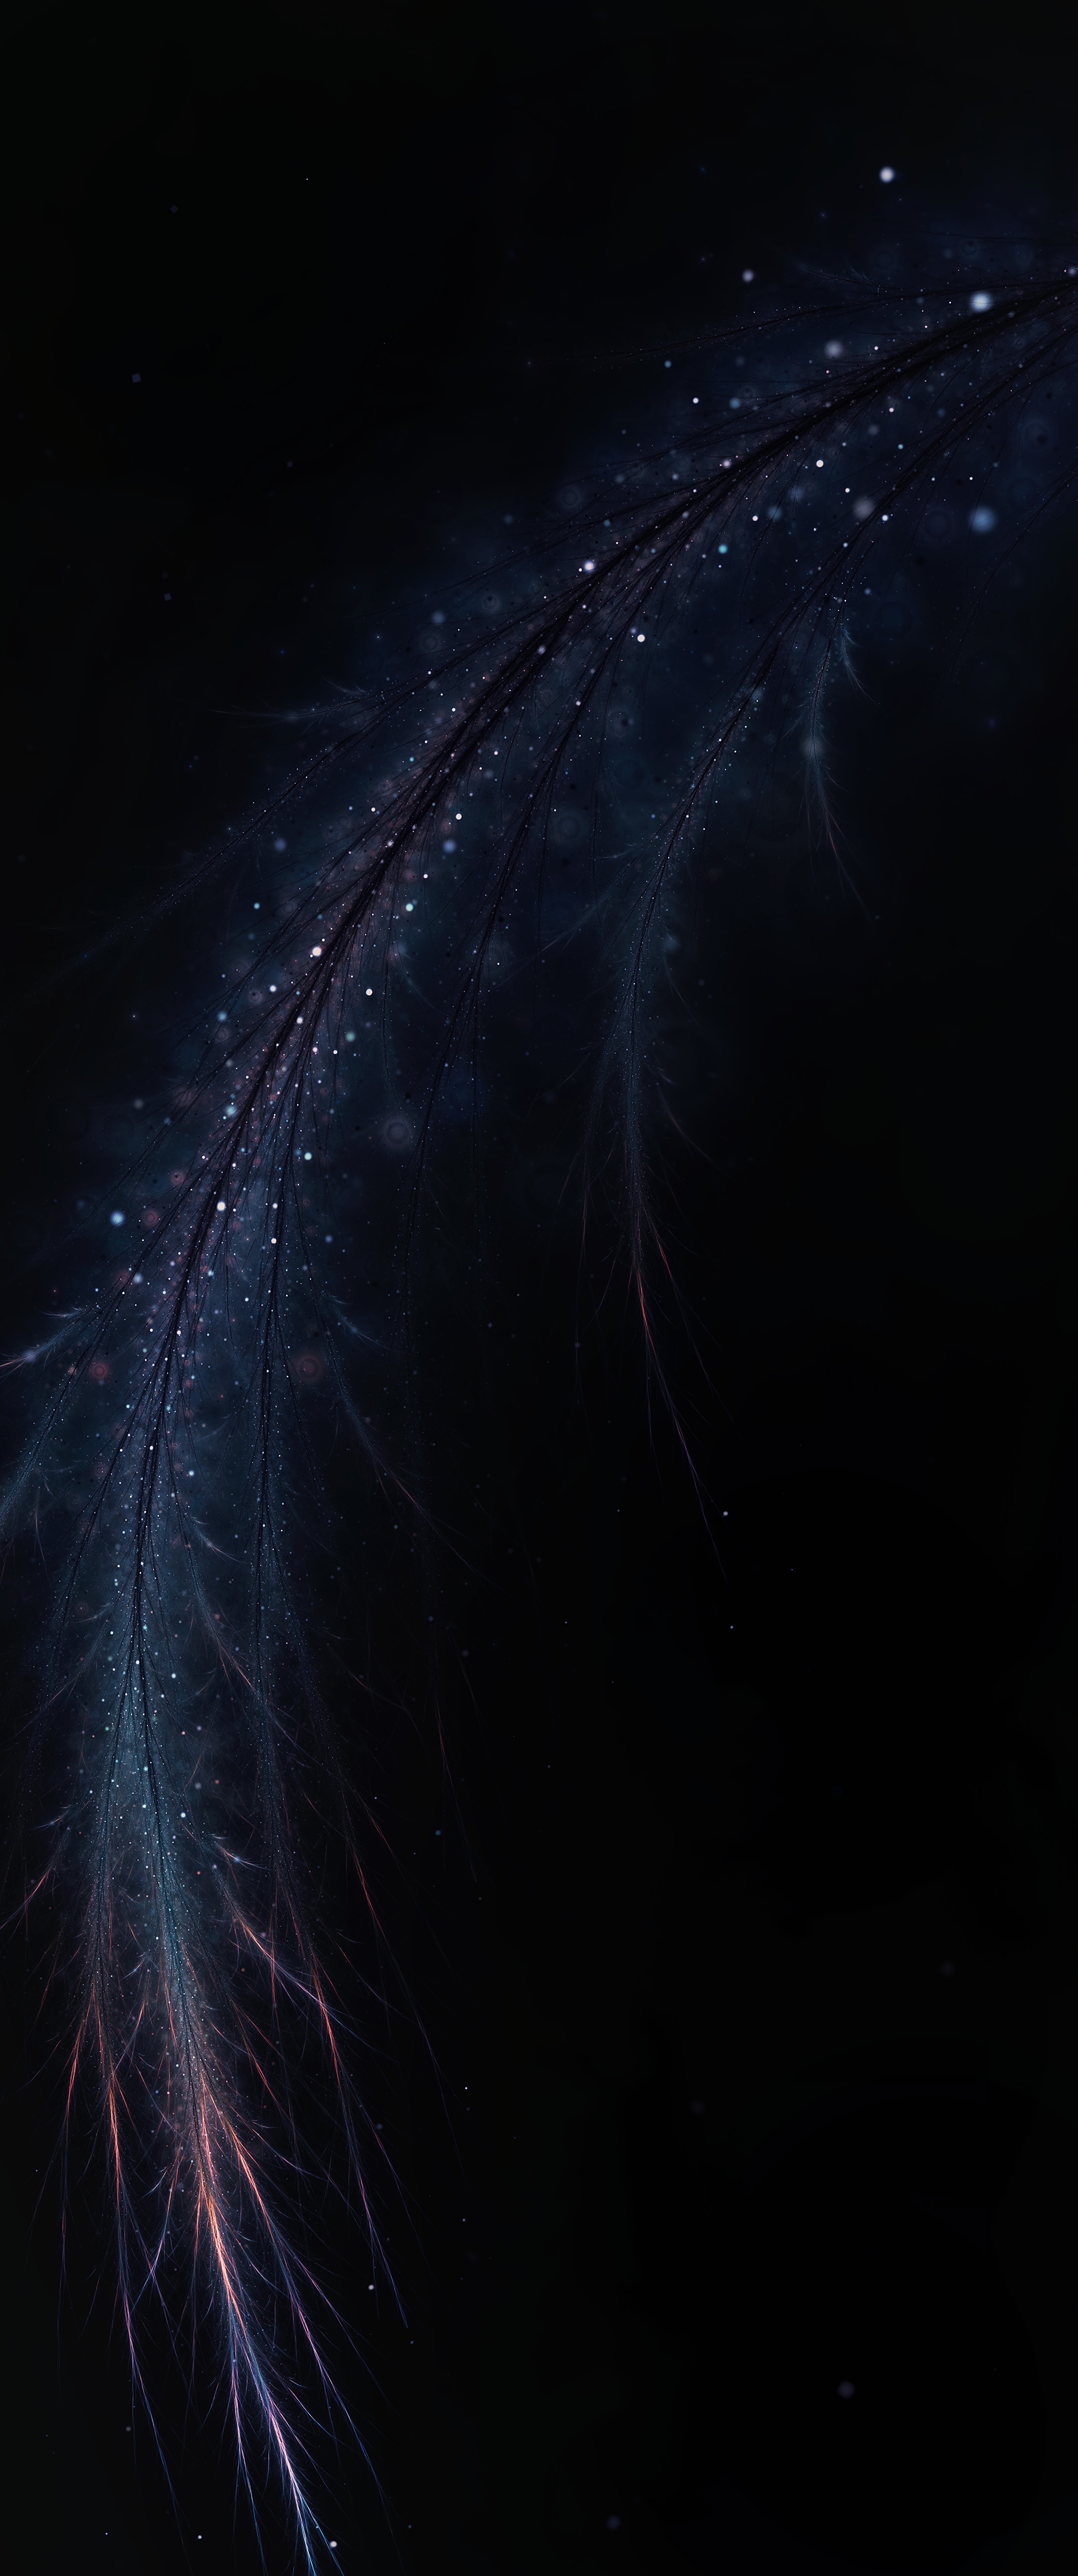 dark, abstract, feather, fractal, shine, brilliance, branch, pen Full HD